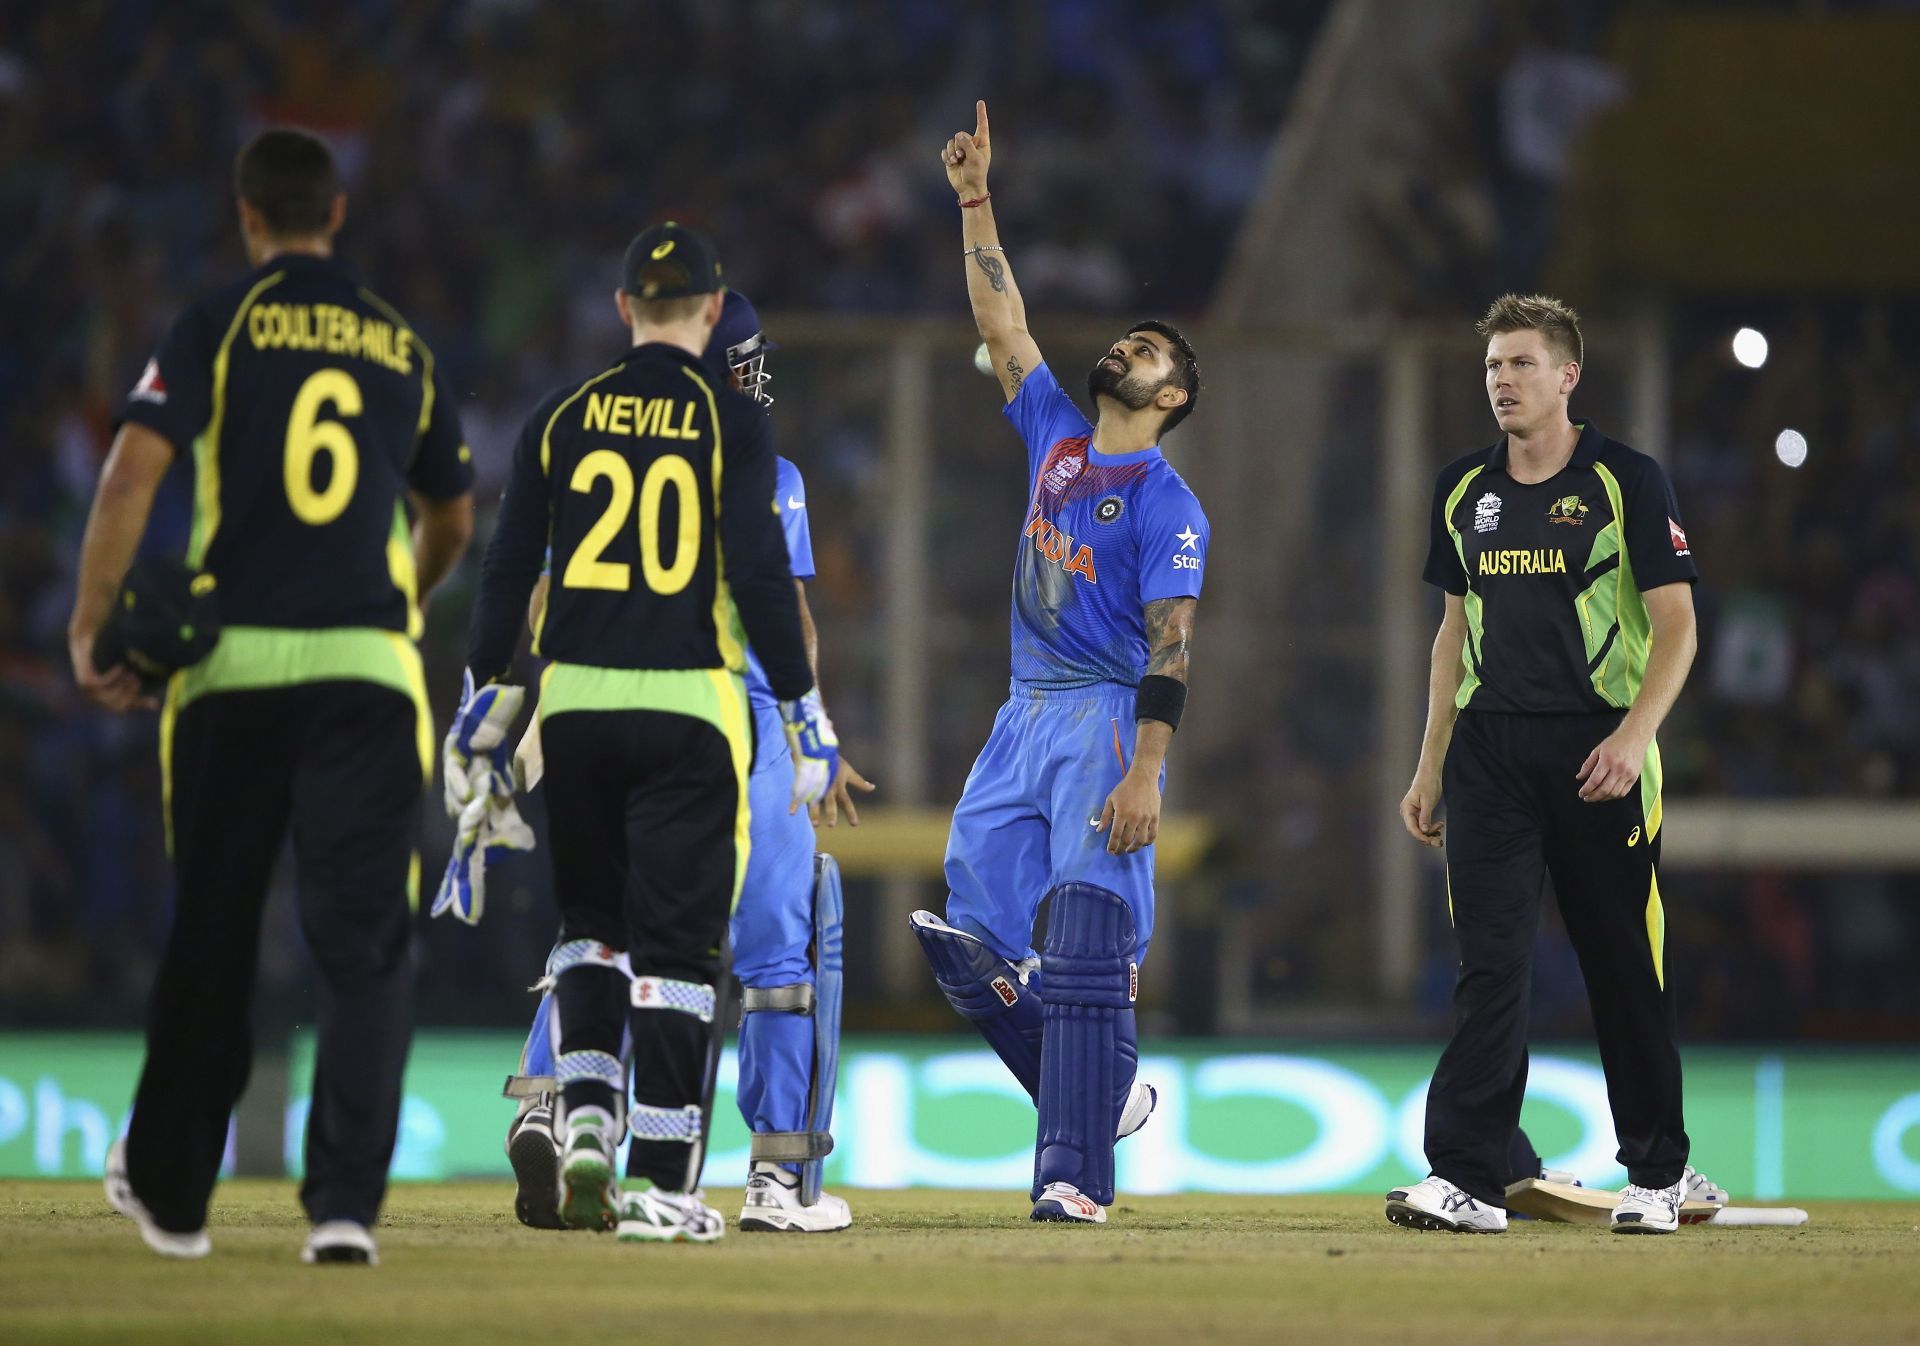 The batter reacts after guiding India in another crucial chase. Pic: Getty Images